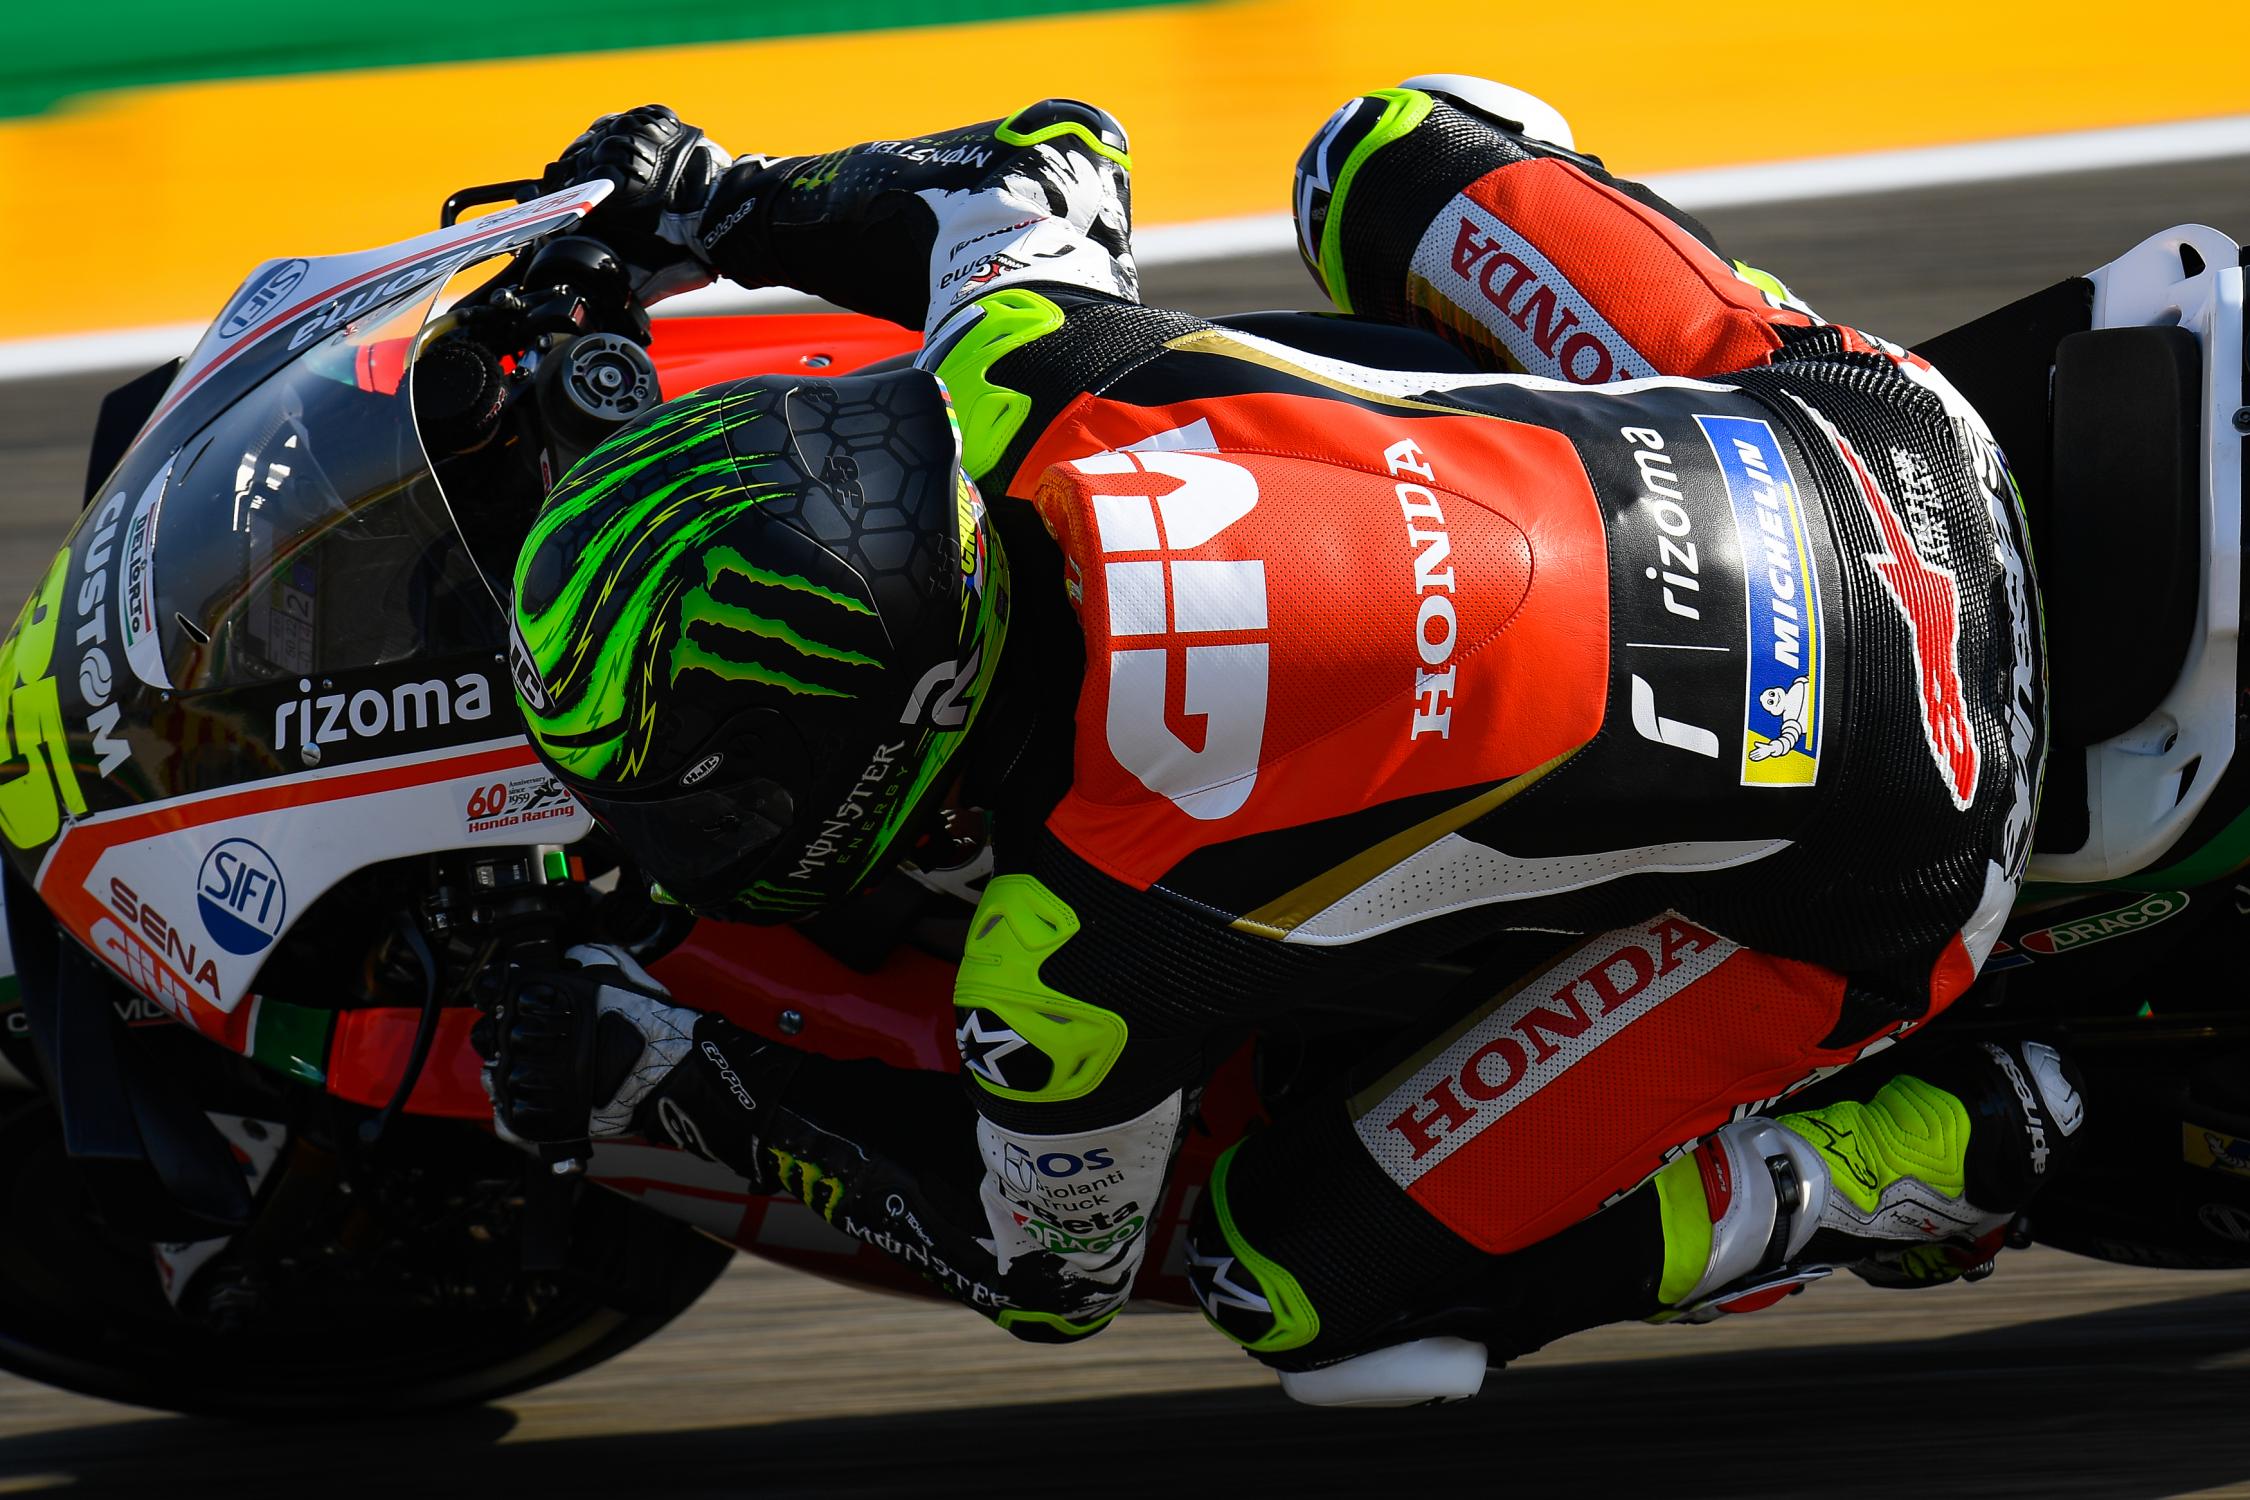 Crutchlow on the third row in Aragon